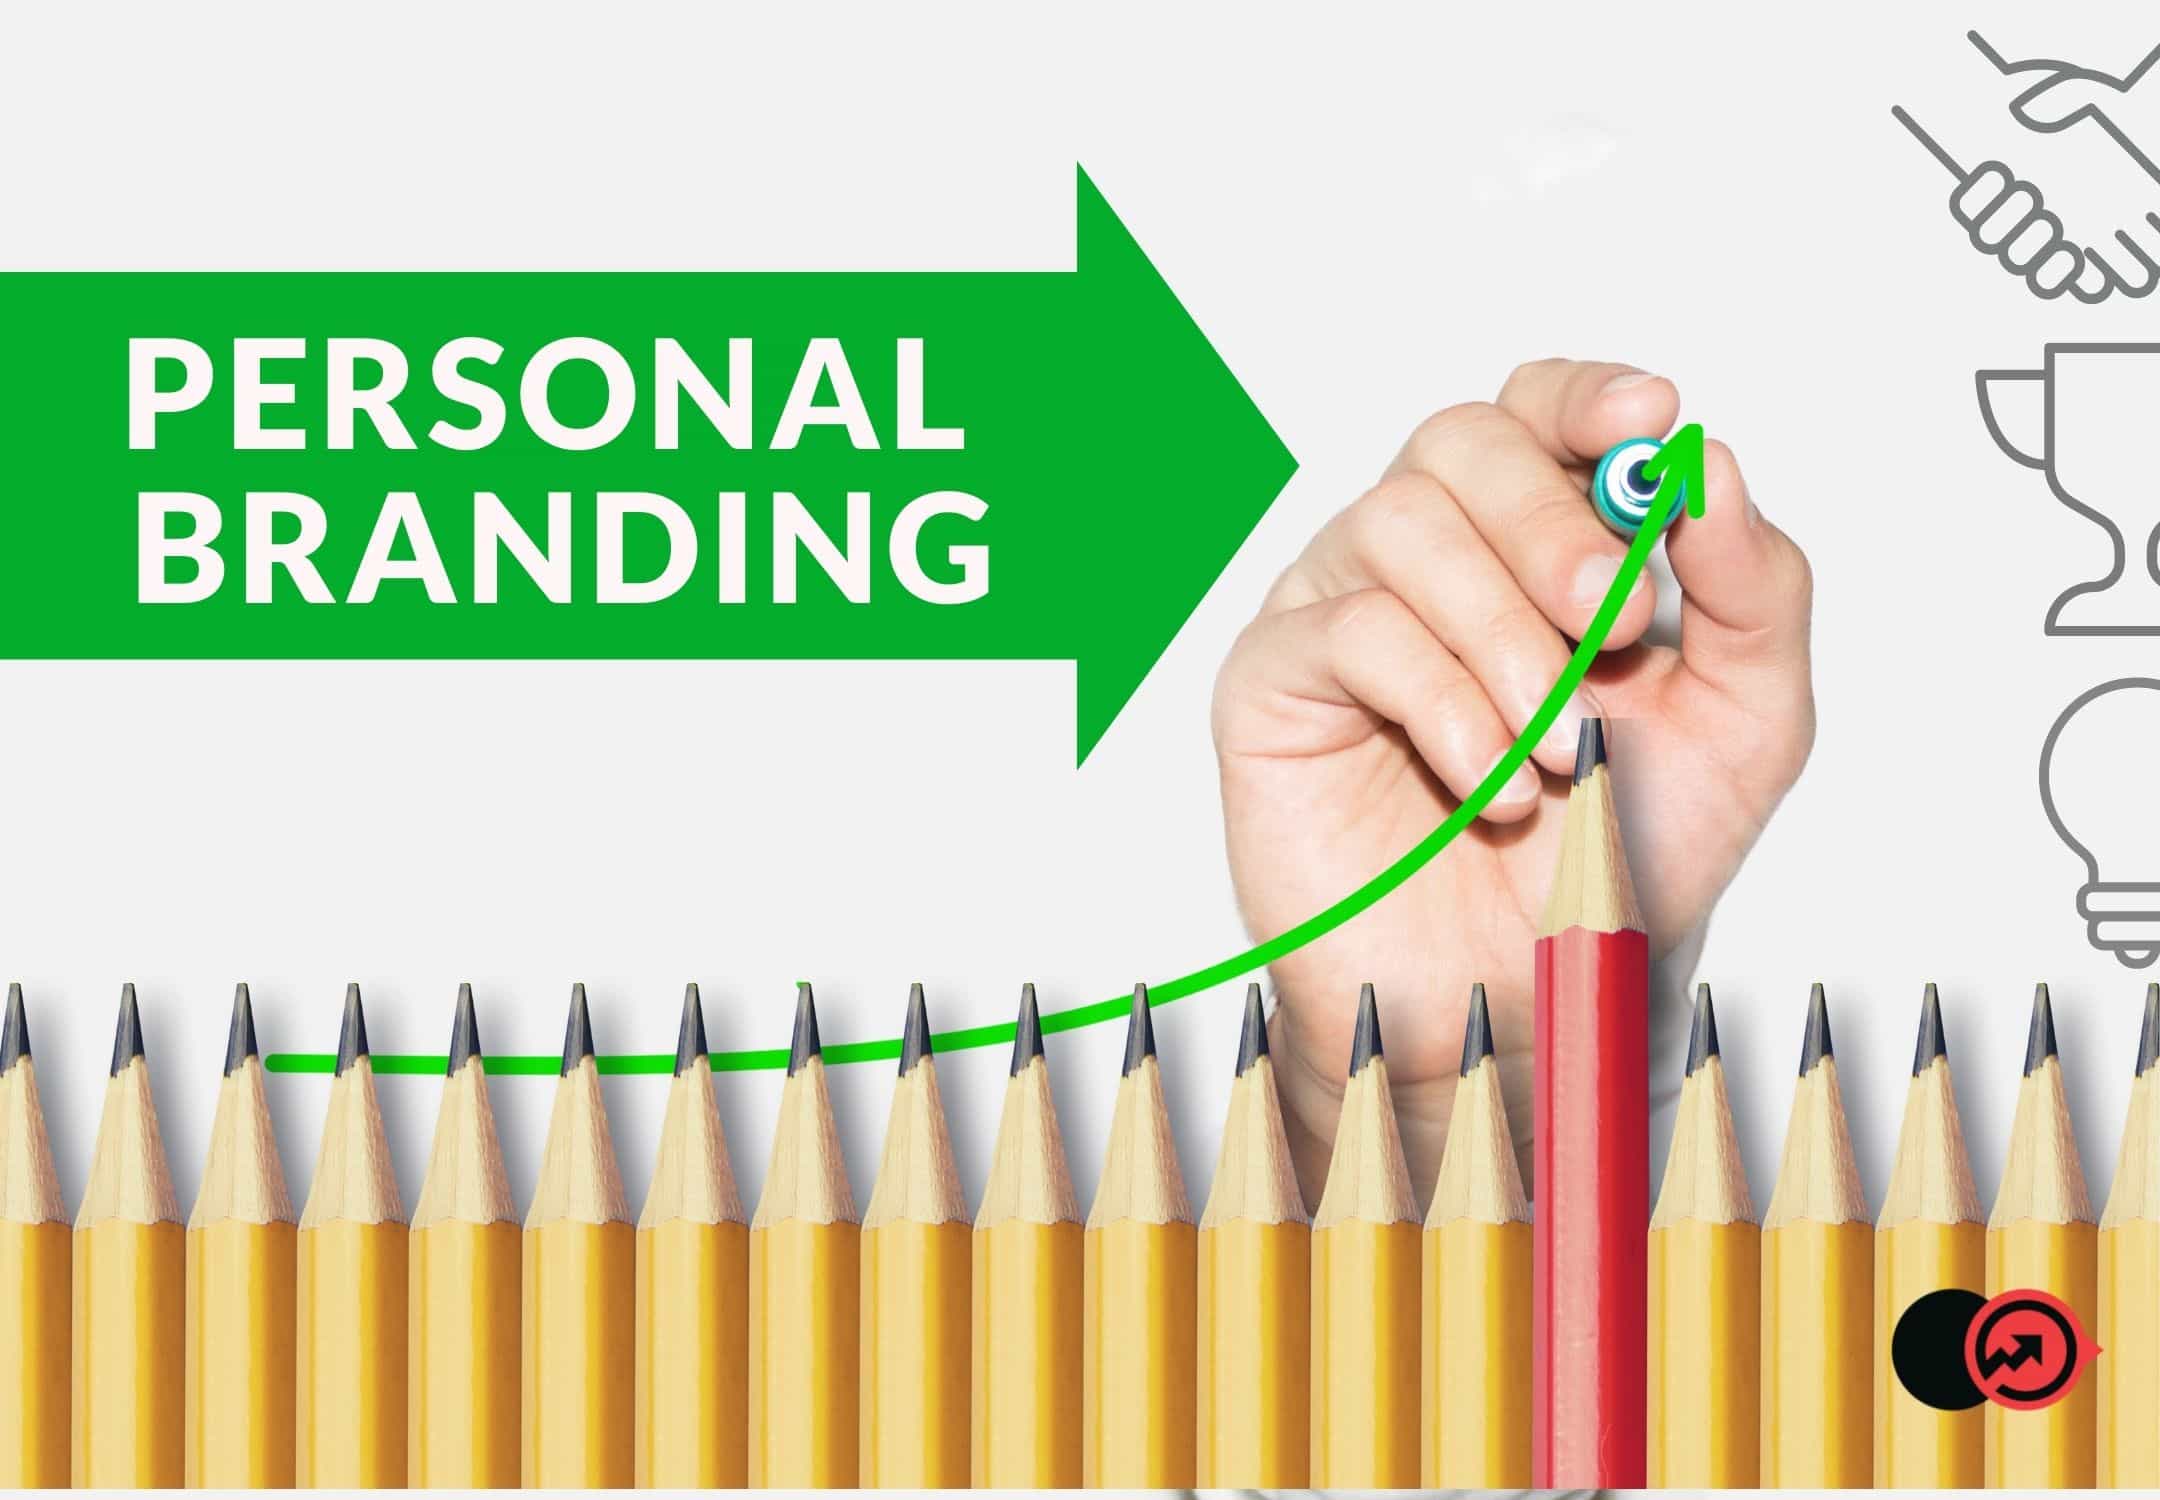 Personal Branding Promotion Image.